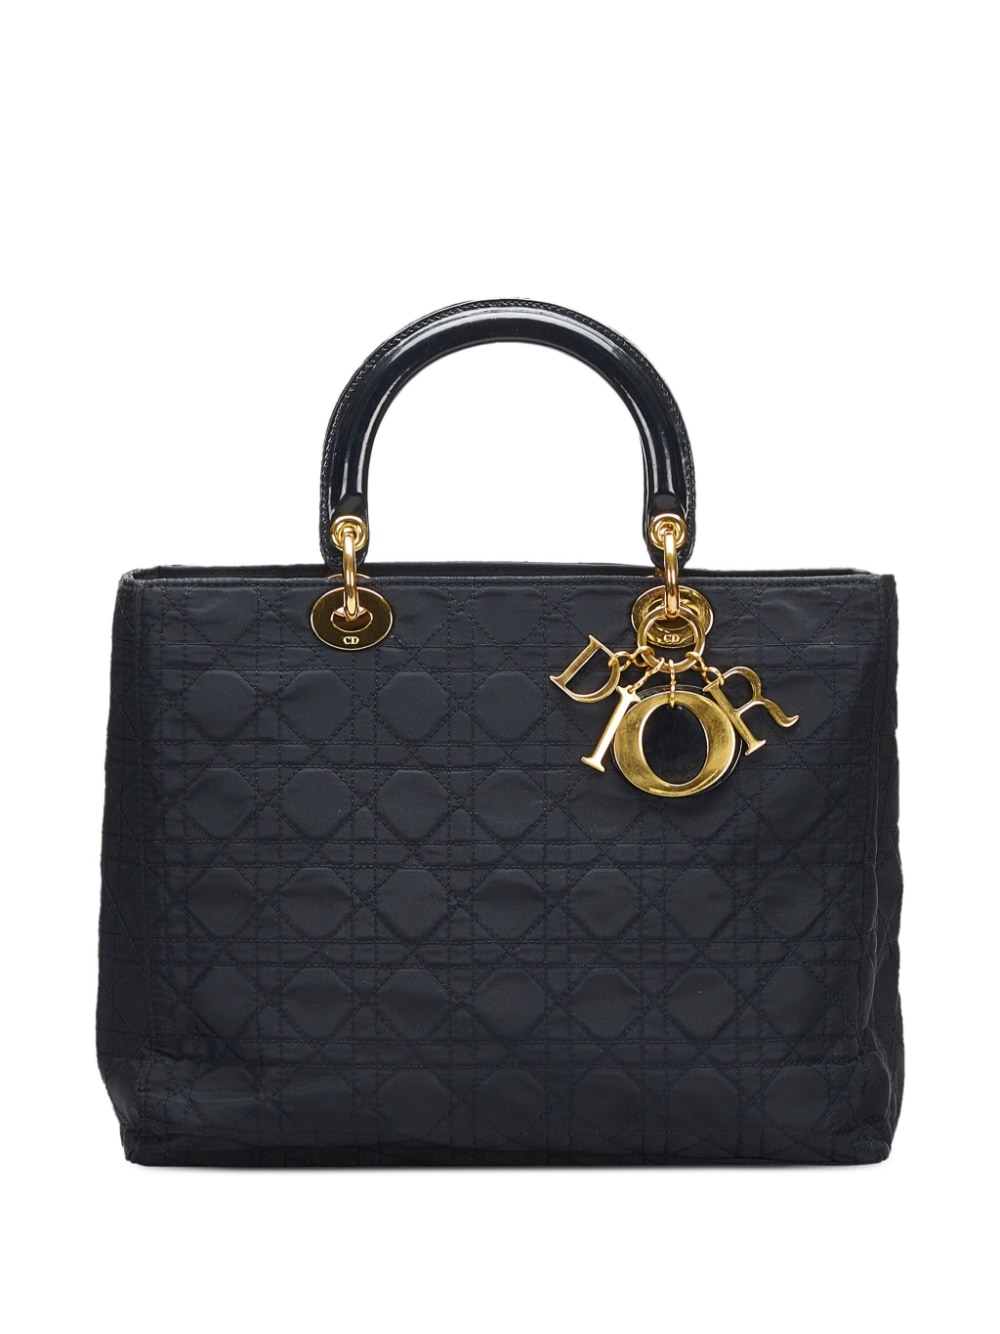 Christian Dior - pre-owned large Lady Dior Cannage two-way bag - women - Nylon/Leather - One Size - Black